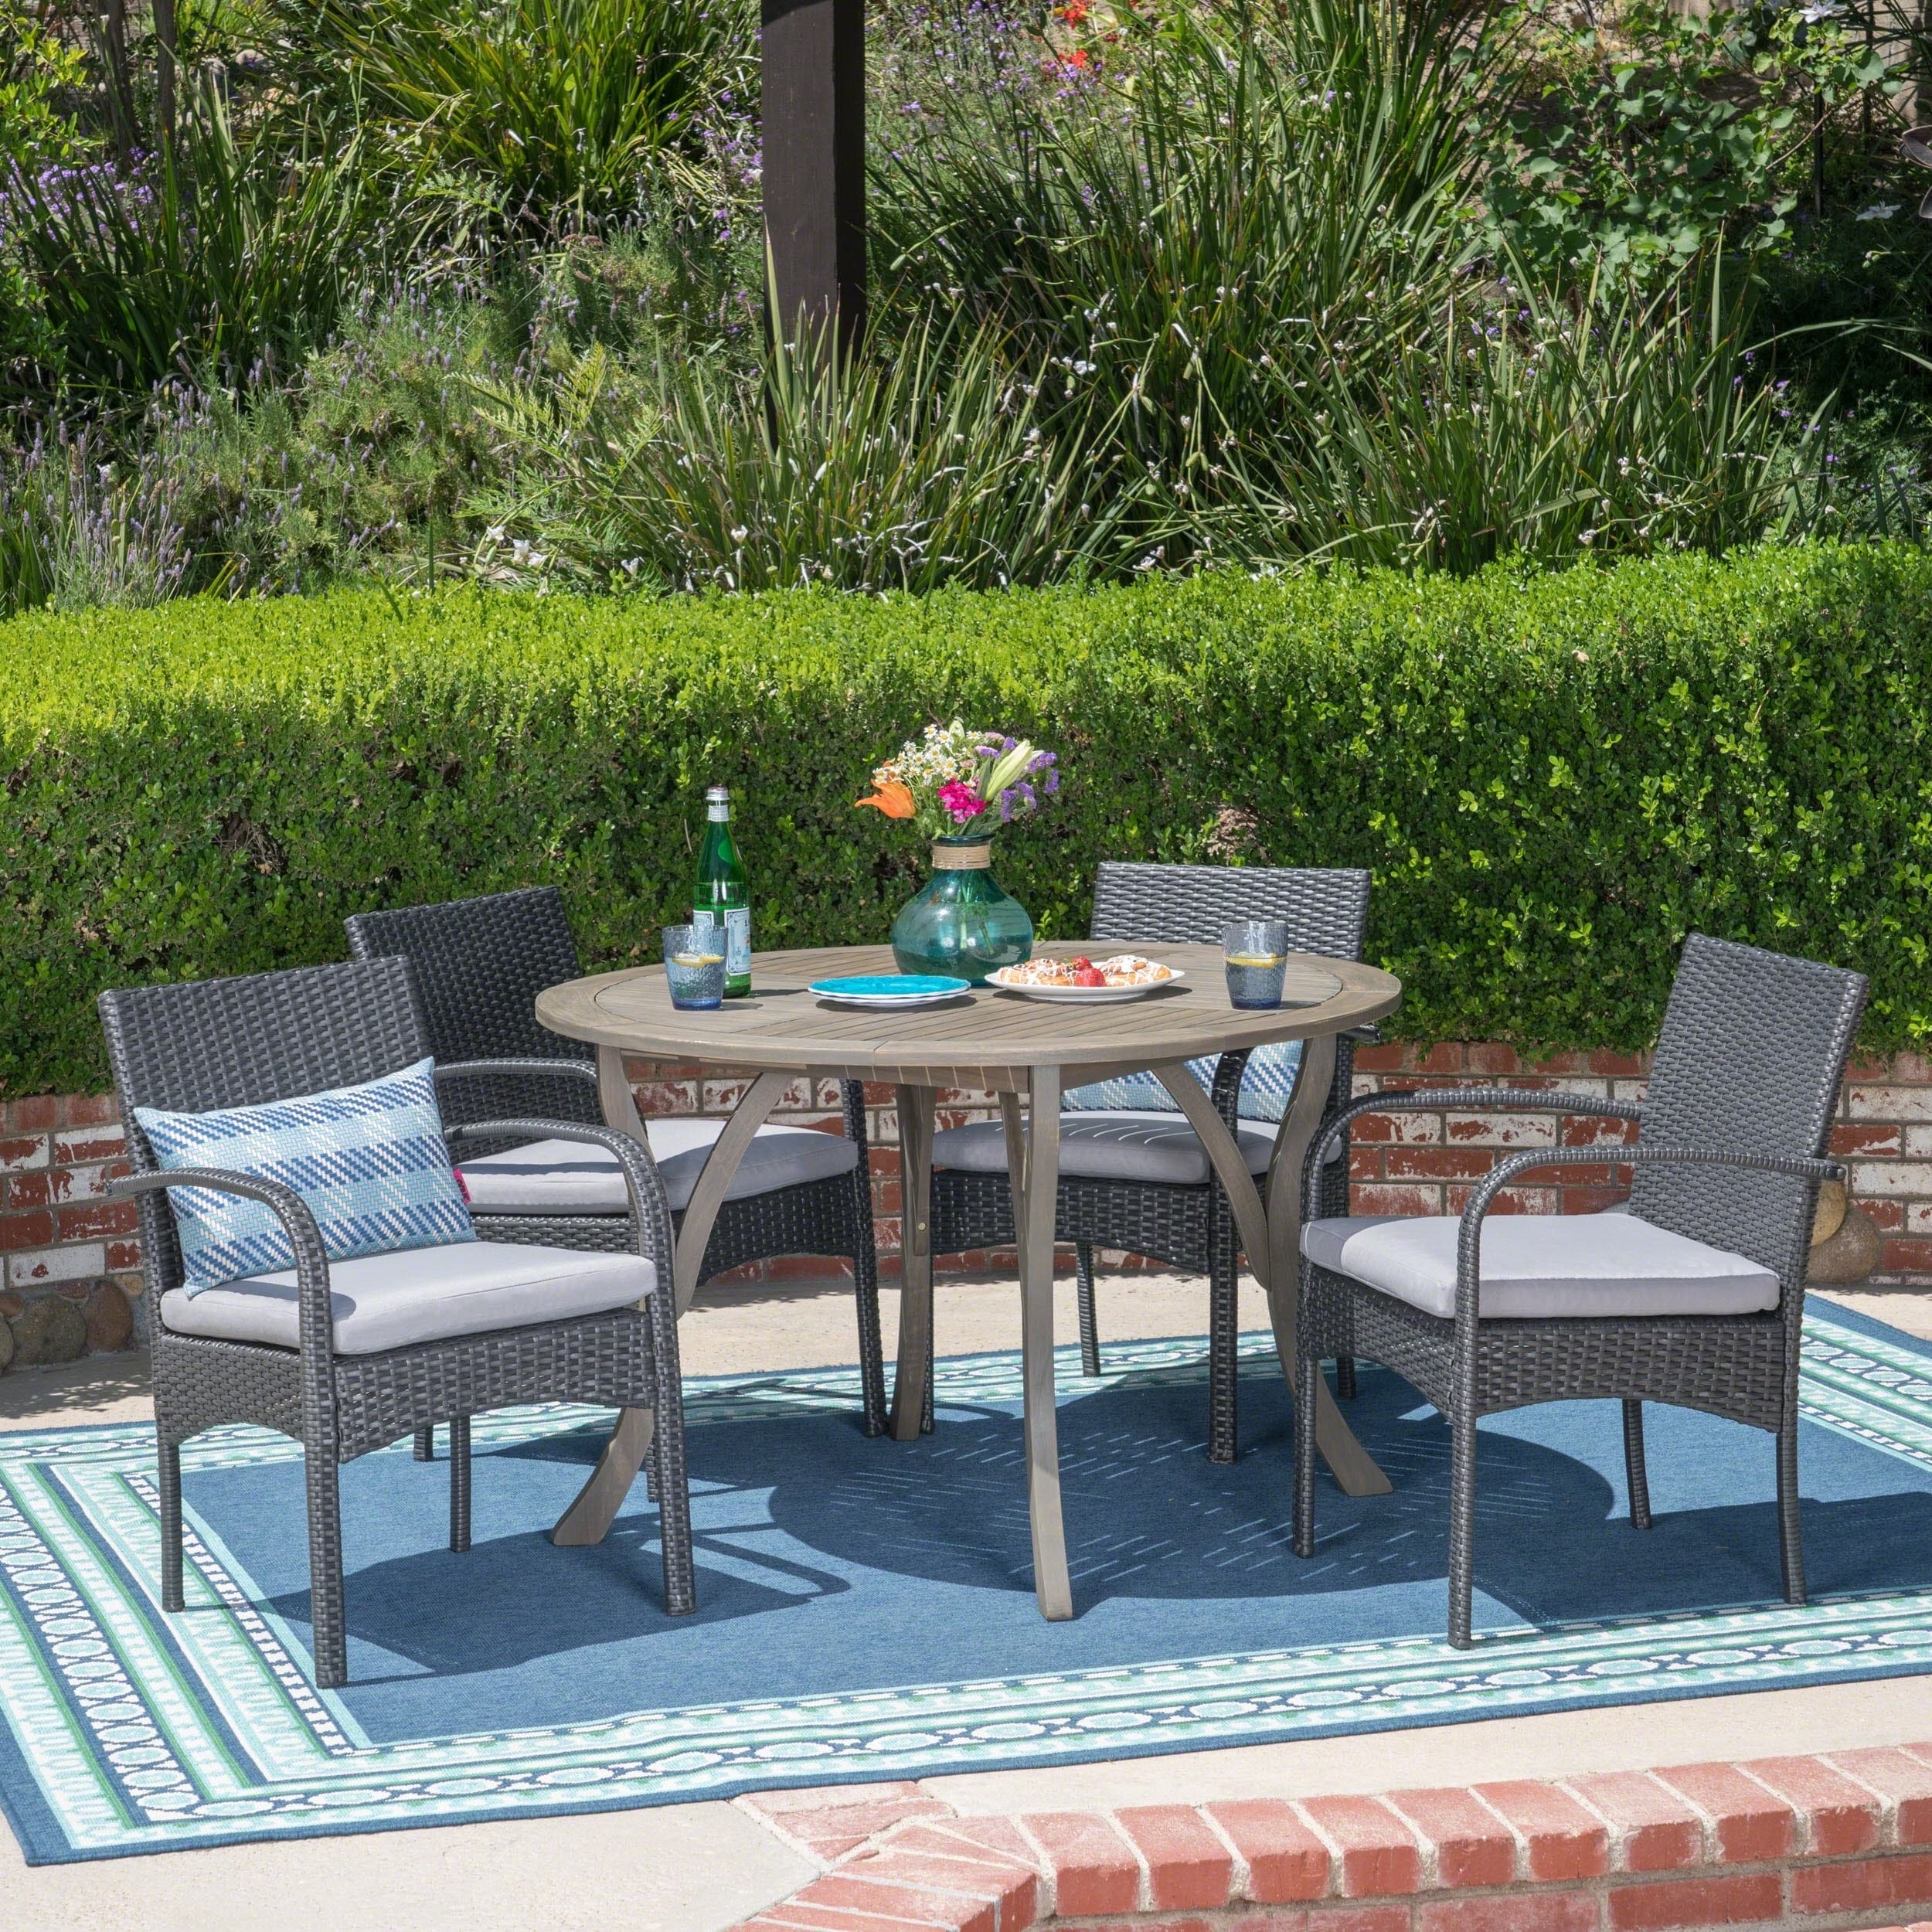 Chilton Outdoor 5 Piece Acacia Wood And Wicker Dining Set By Christopher Knight Home